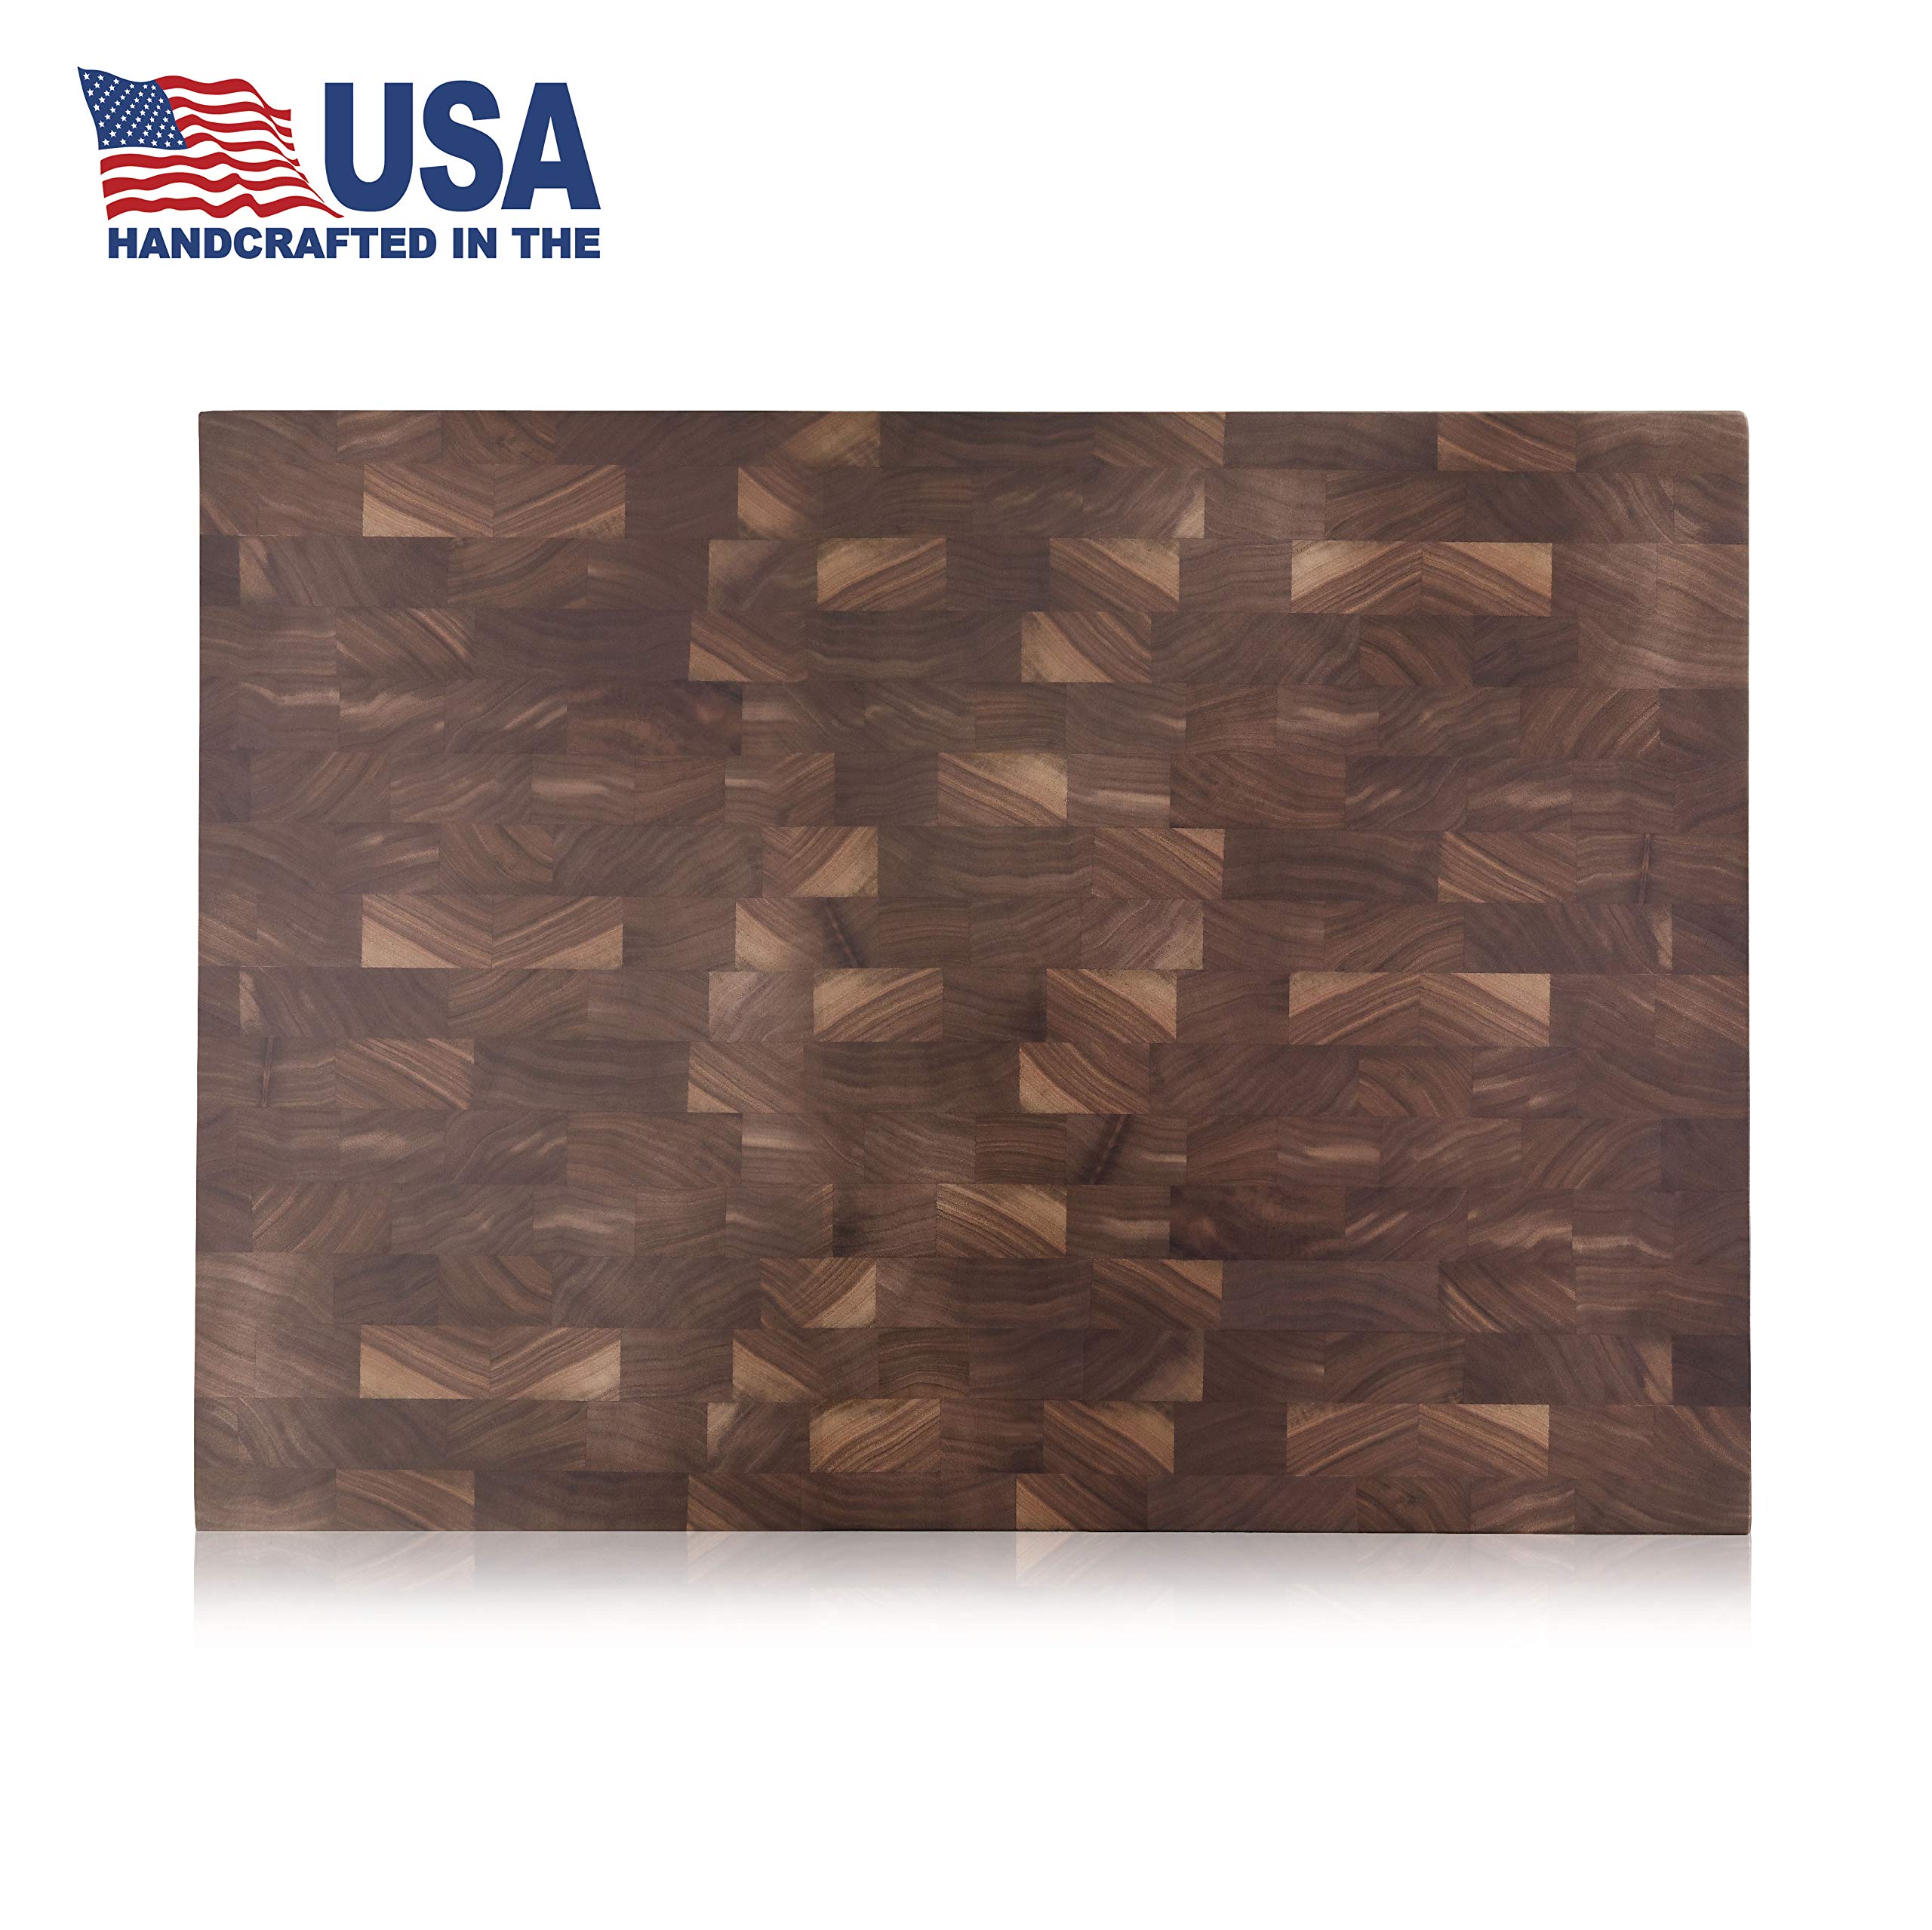 Cangshan | Thomas Keller Signature Collection Walnut End-Grain Cutting Board,16 x 22 x 2.0", Crafted in USA